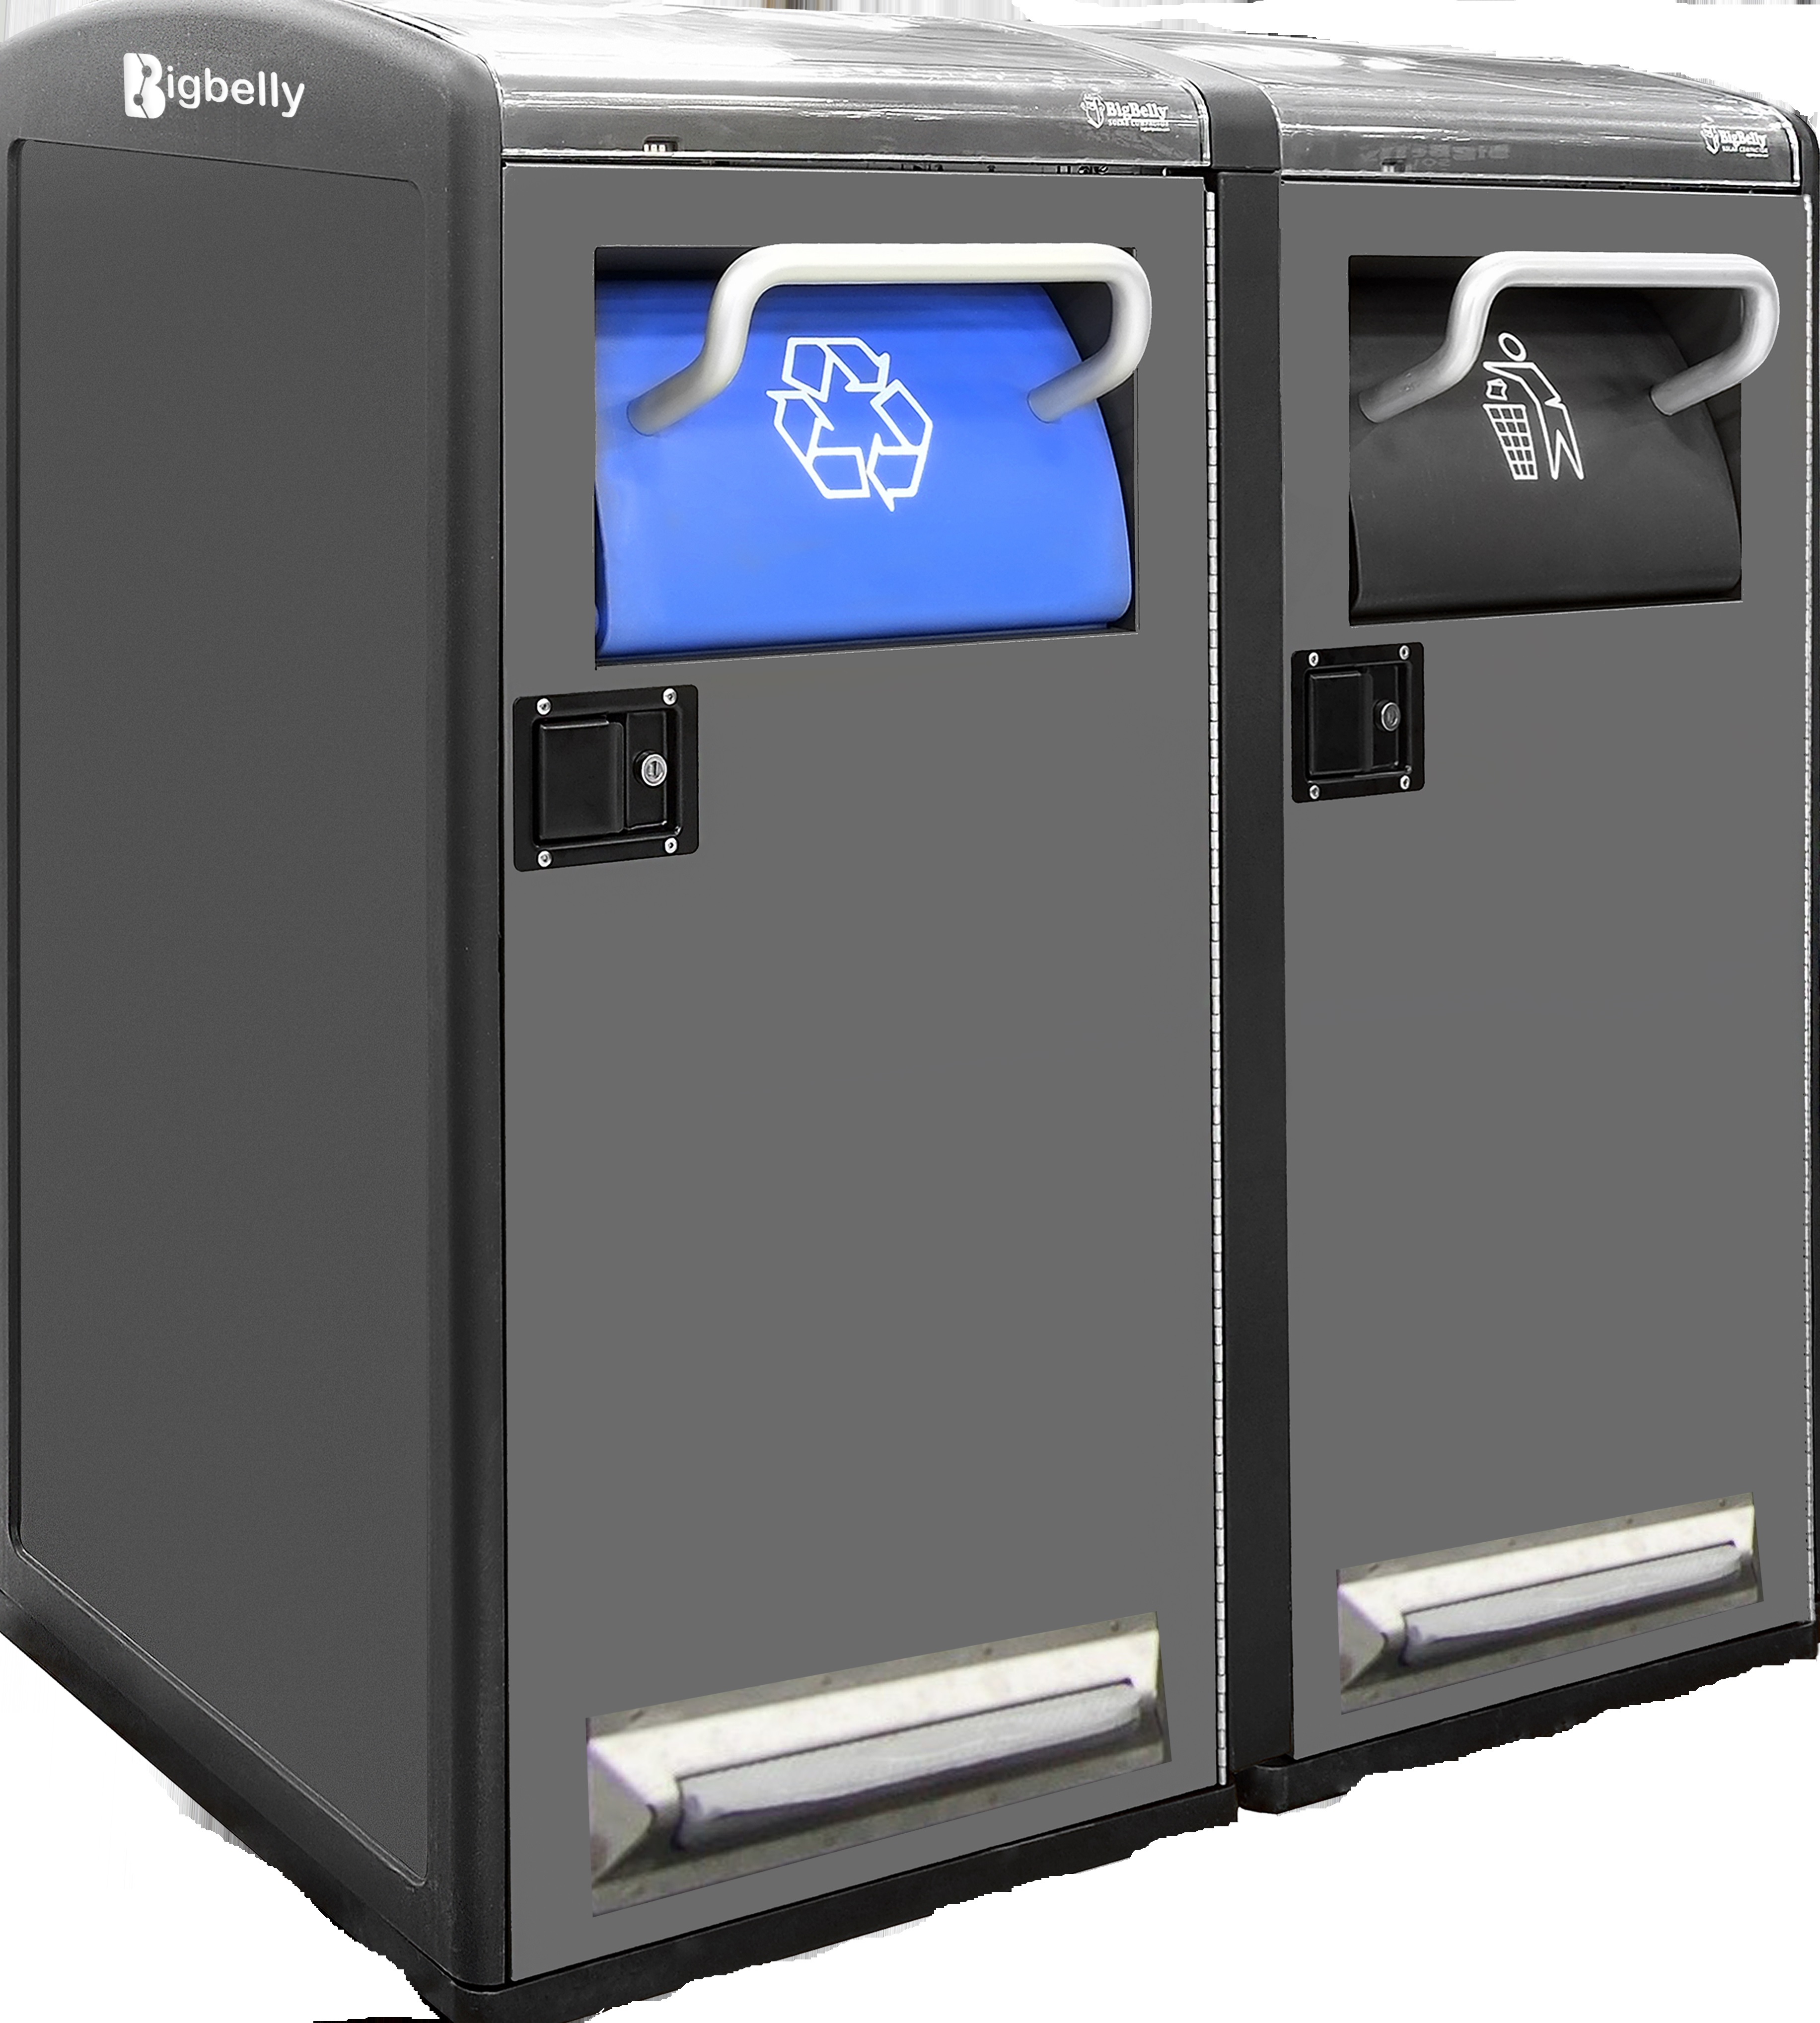 Side by side large enclosed trash and recycling bins